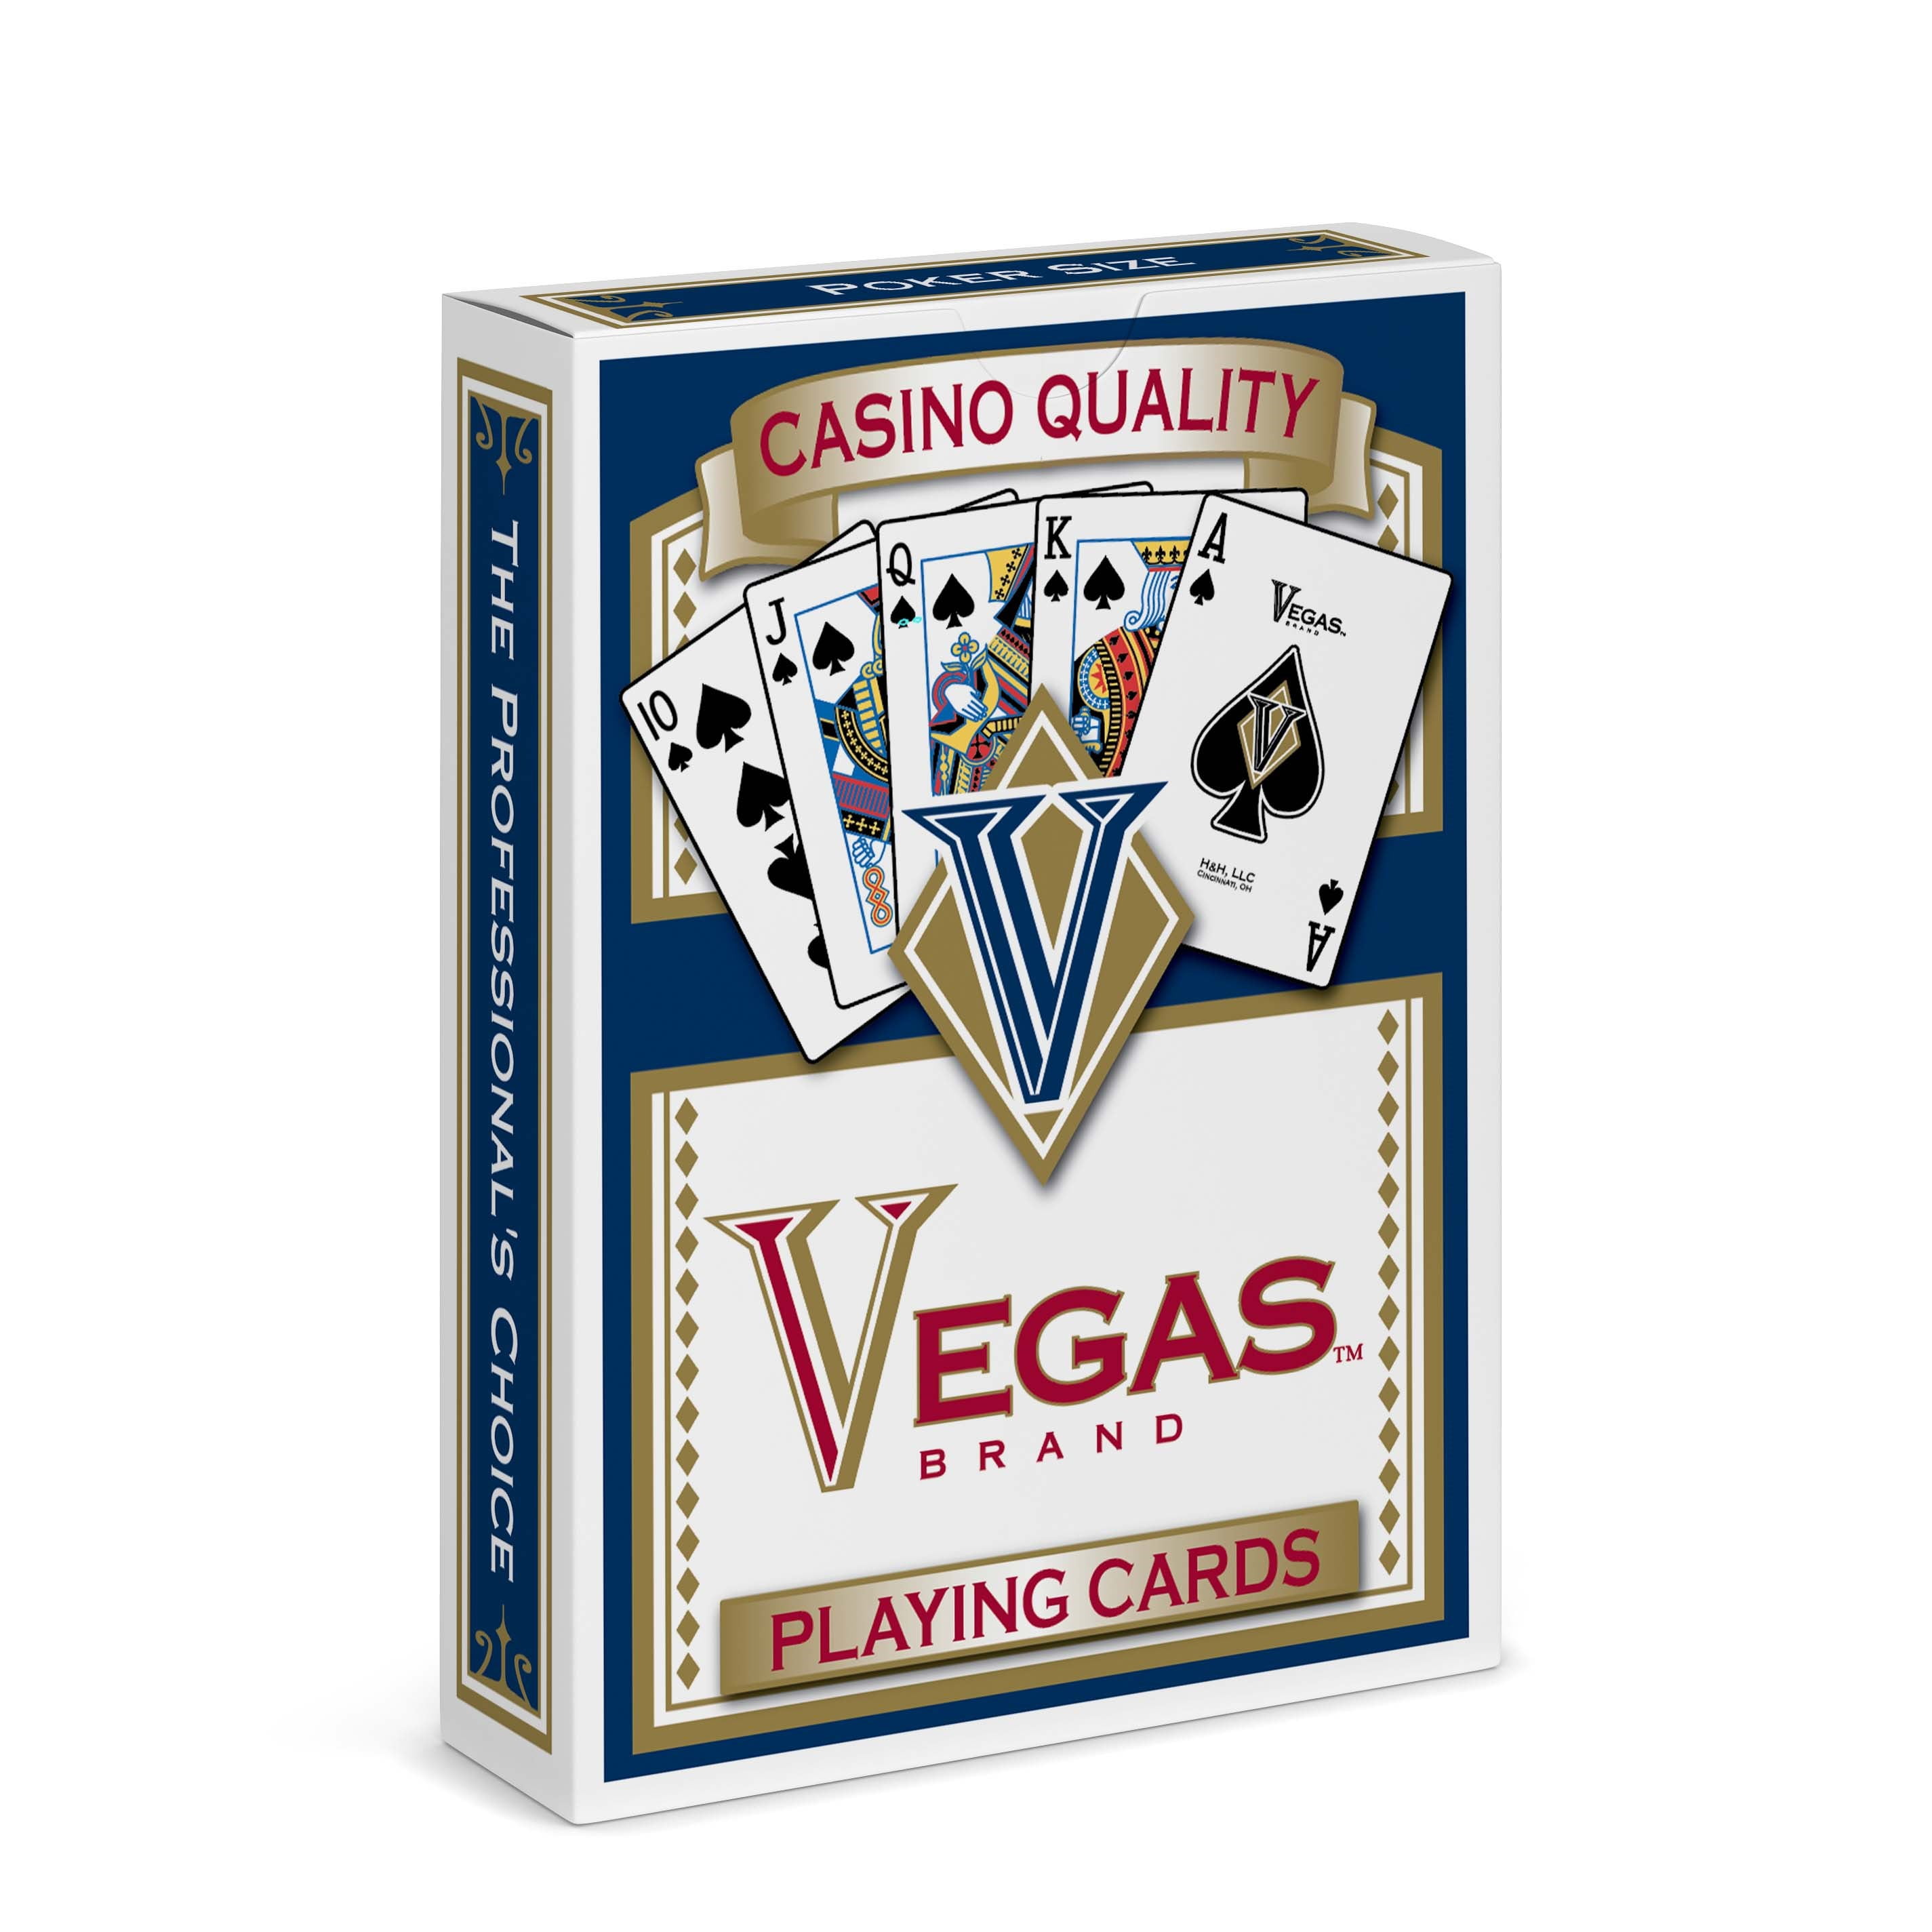 SECURITY SEALED ORIGINAL PLAYING CARDS Plastic Coated Poker Casino Quality Deck 